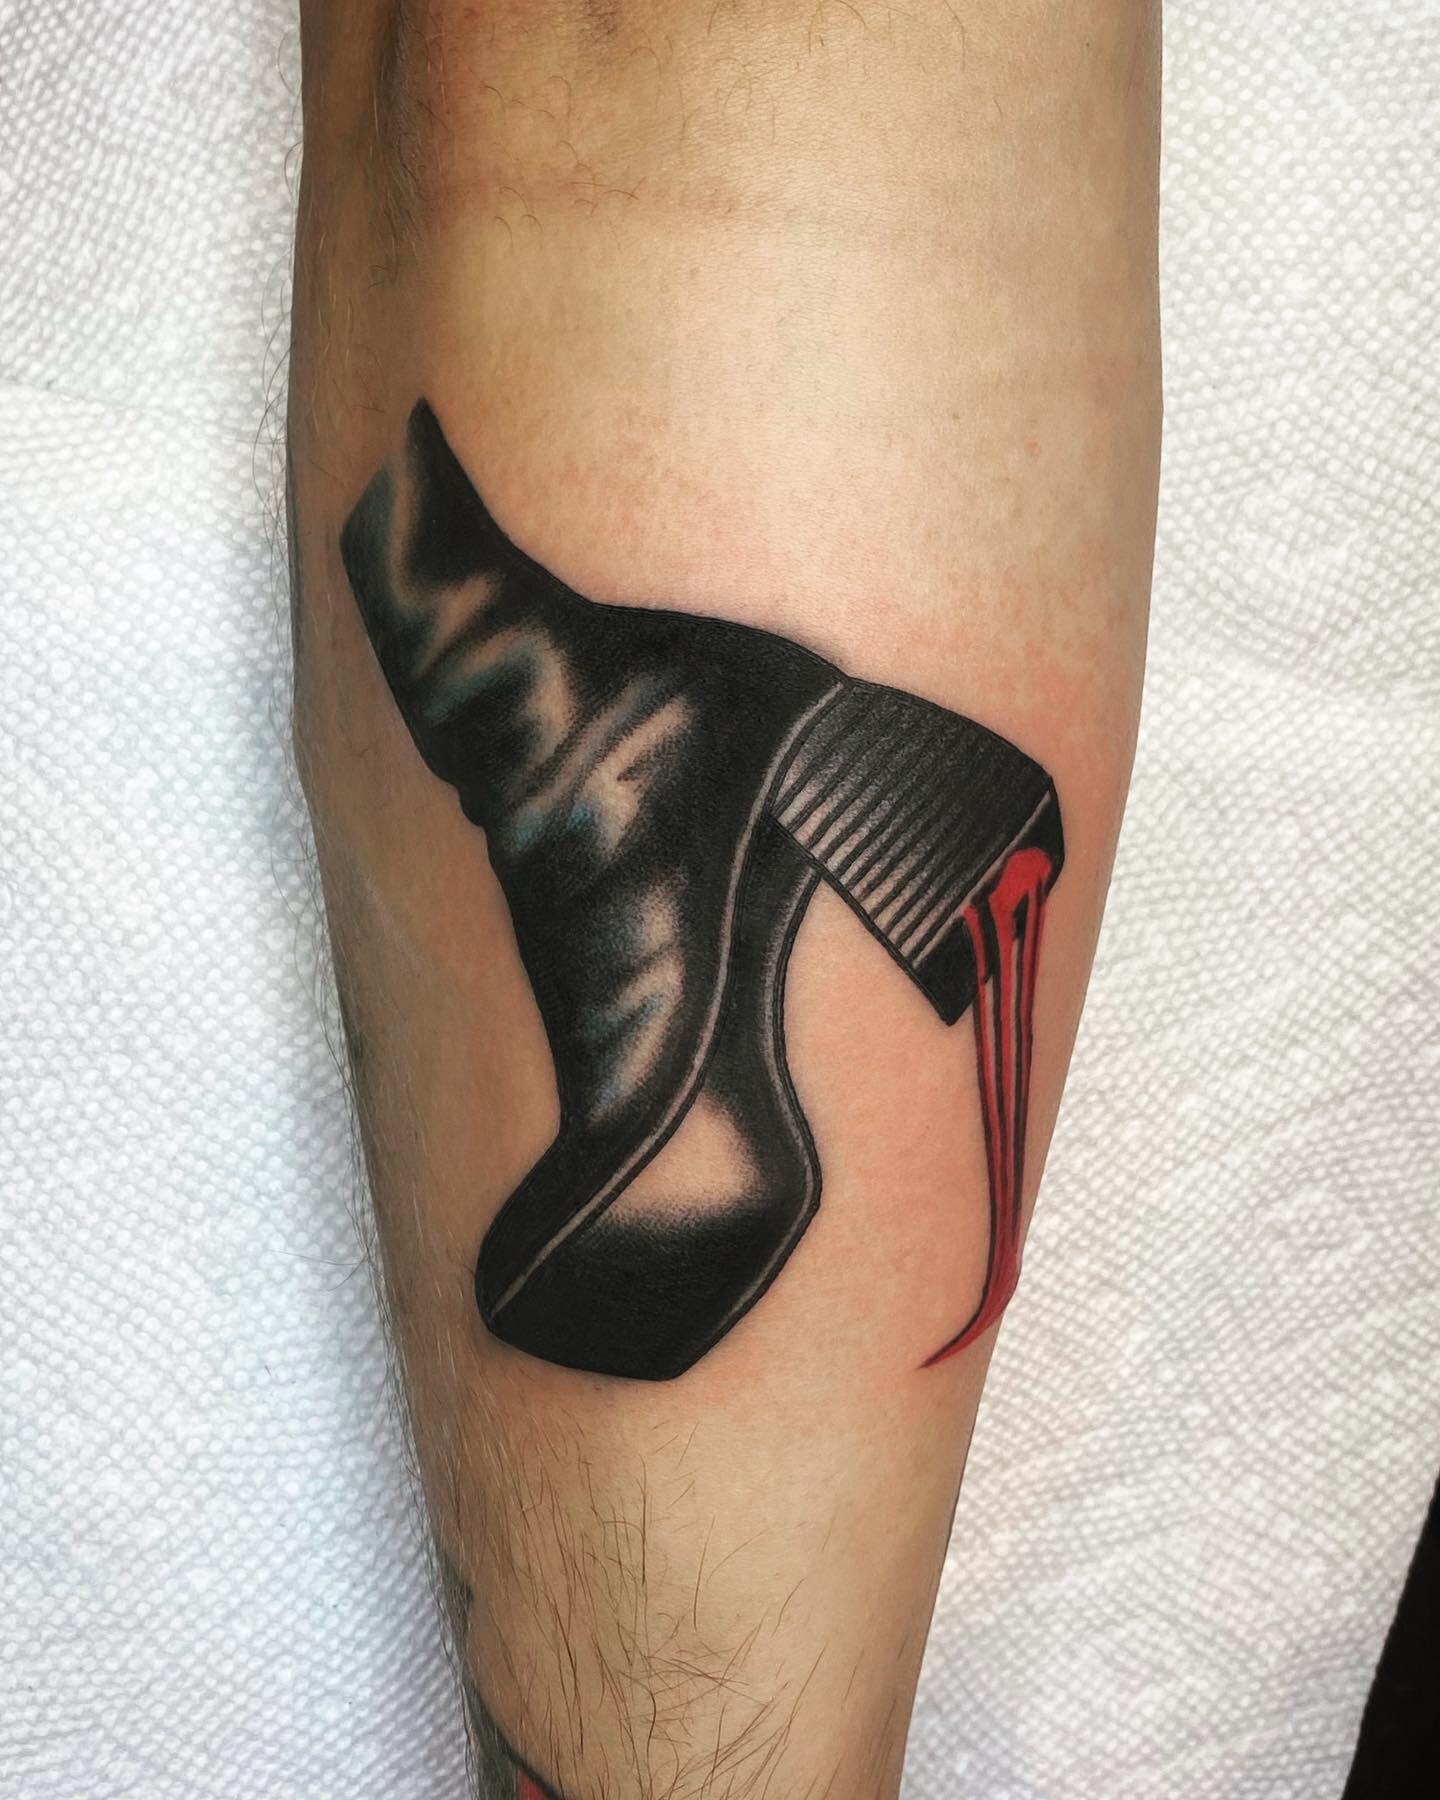 boot from my flash for pat- thanks so much for getting this!

done at @familytattoo